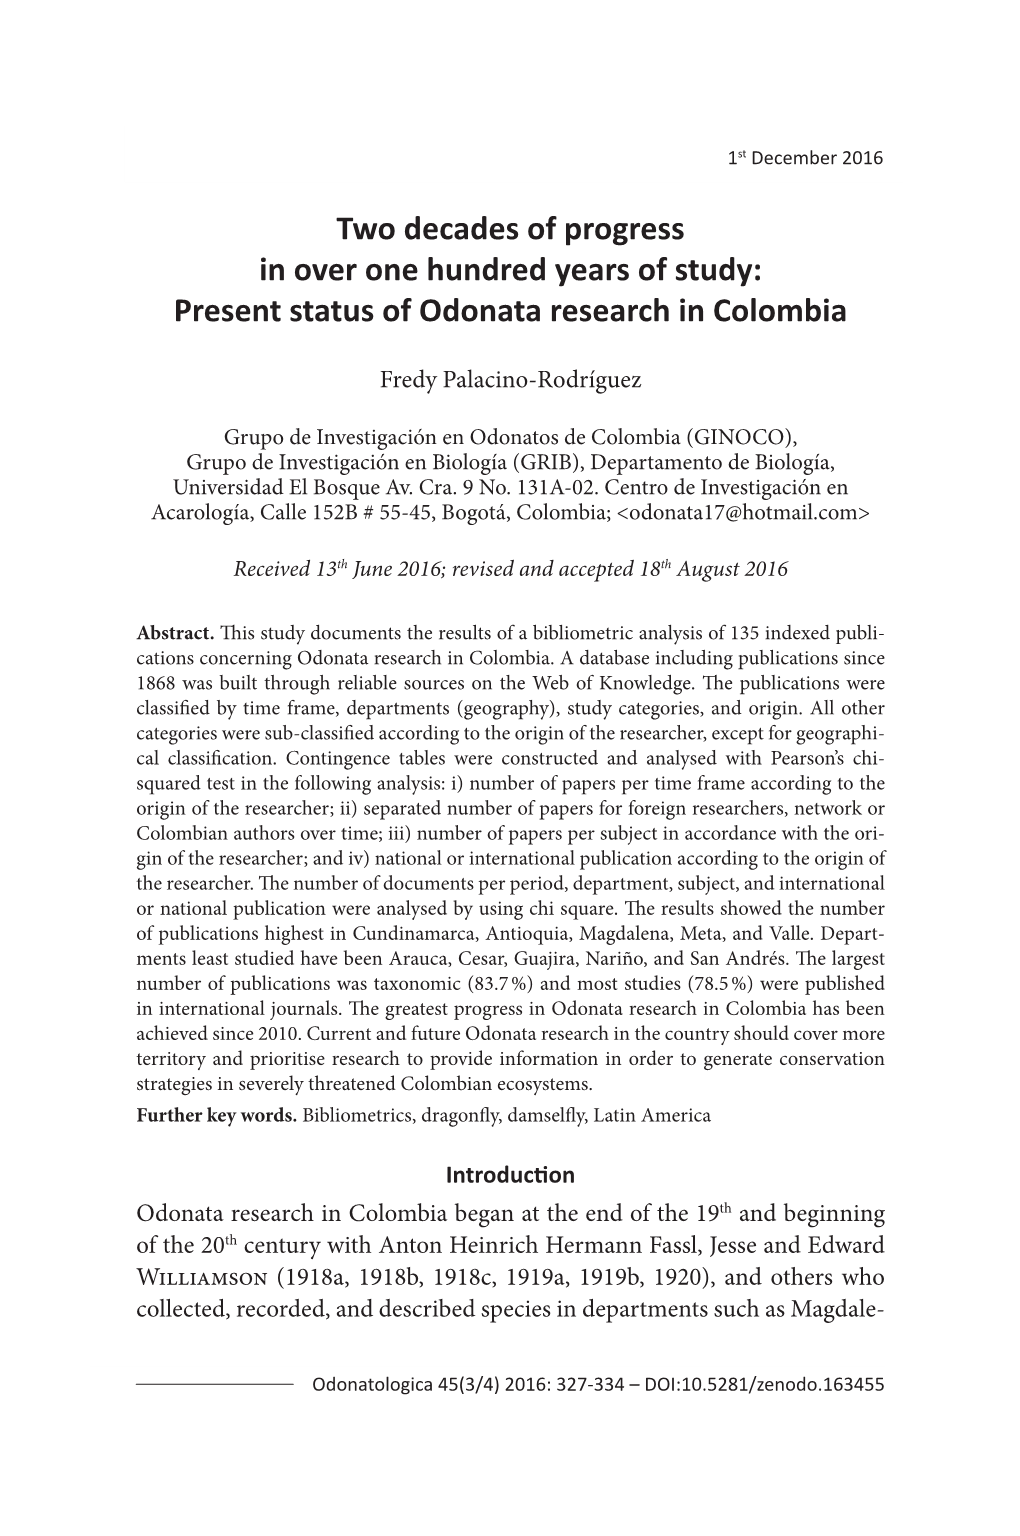 Present Status of Odonata Research in Colombia 1St December 2016327